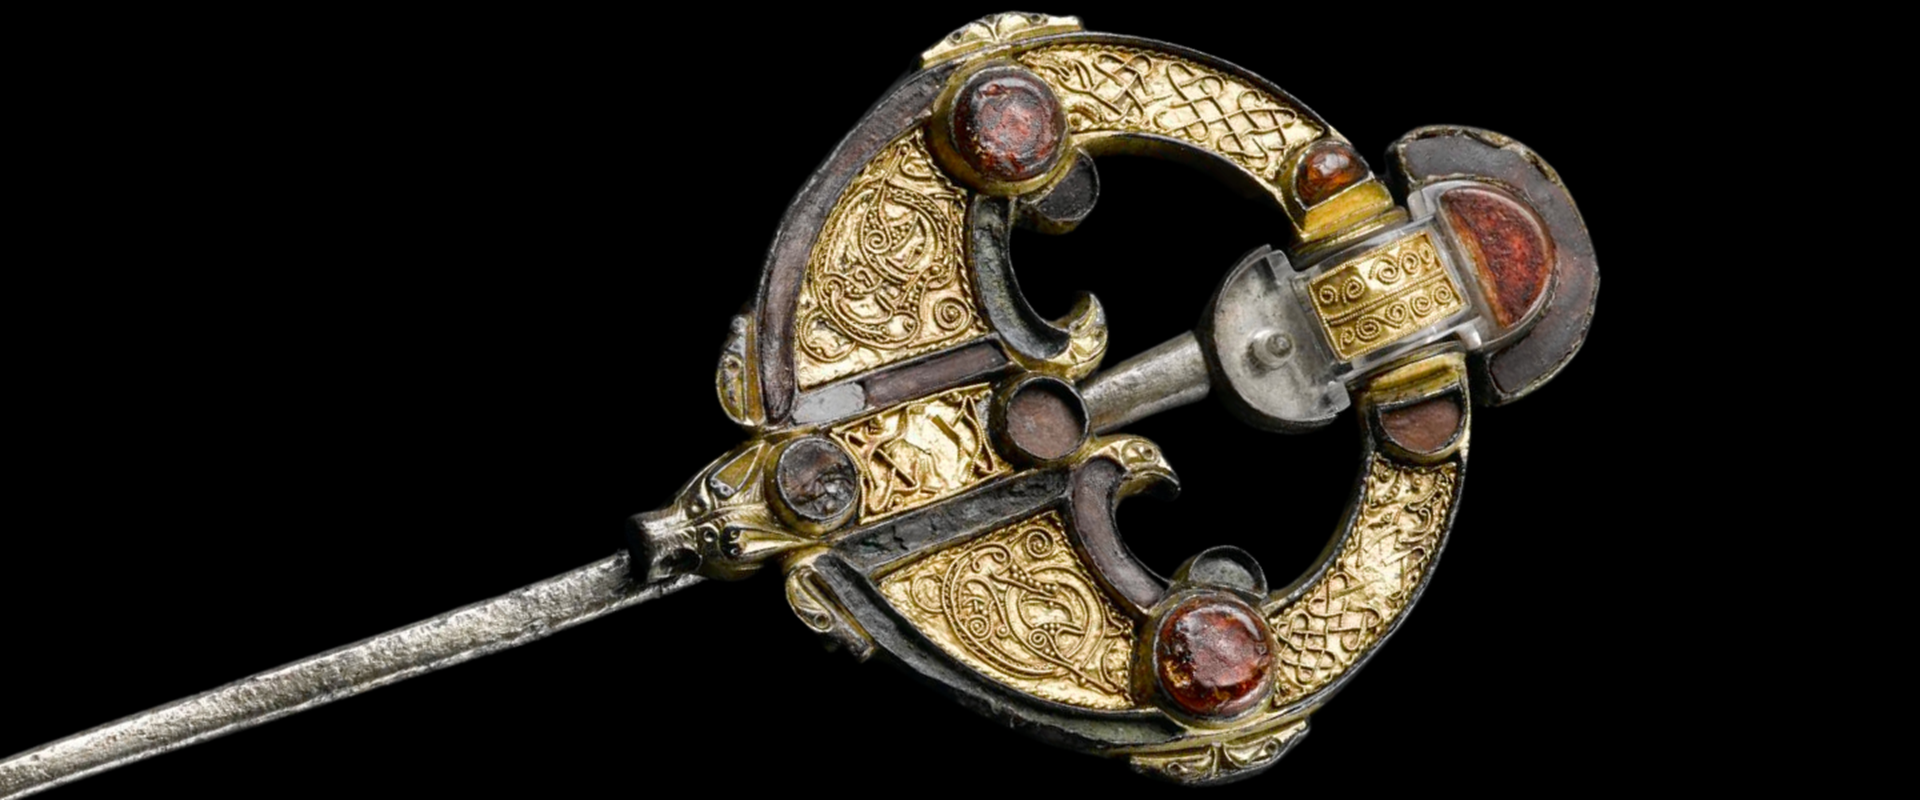 Gold-coloured brooch and pin, intricately decorated with raised Pictish-style patterns and red gemstones.